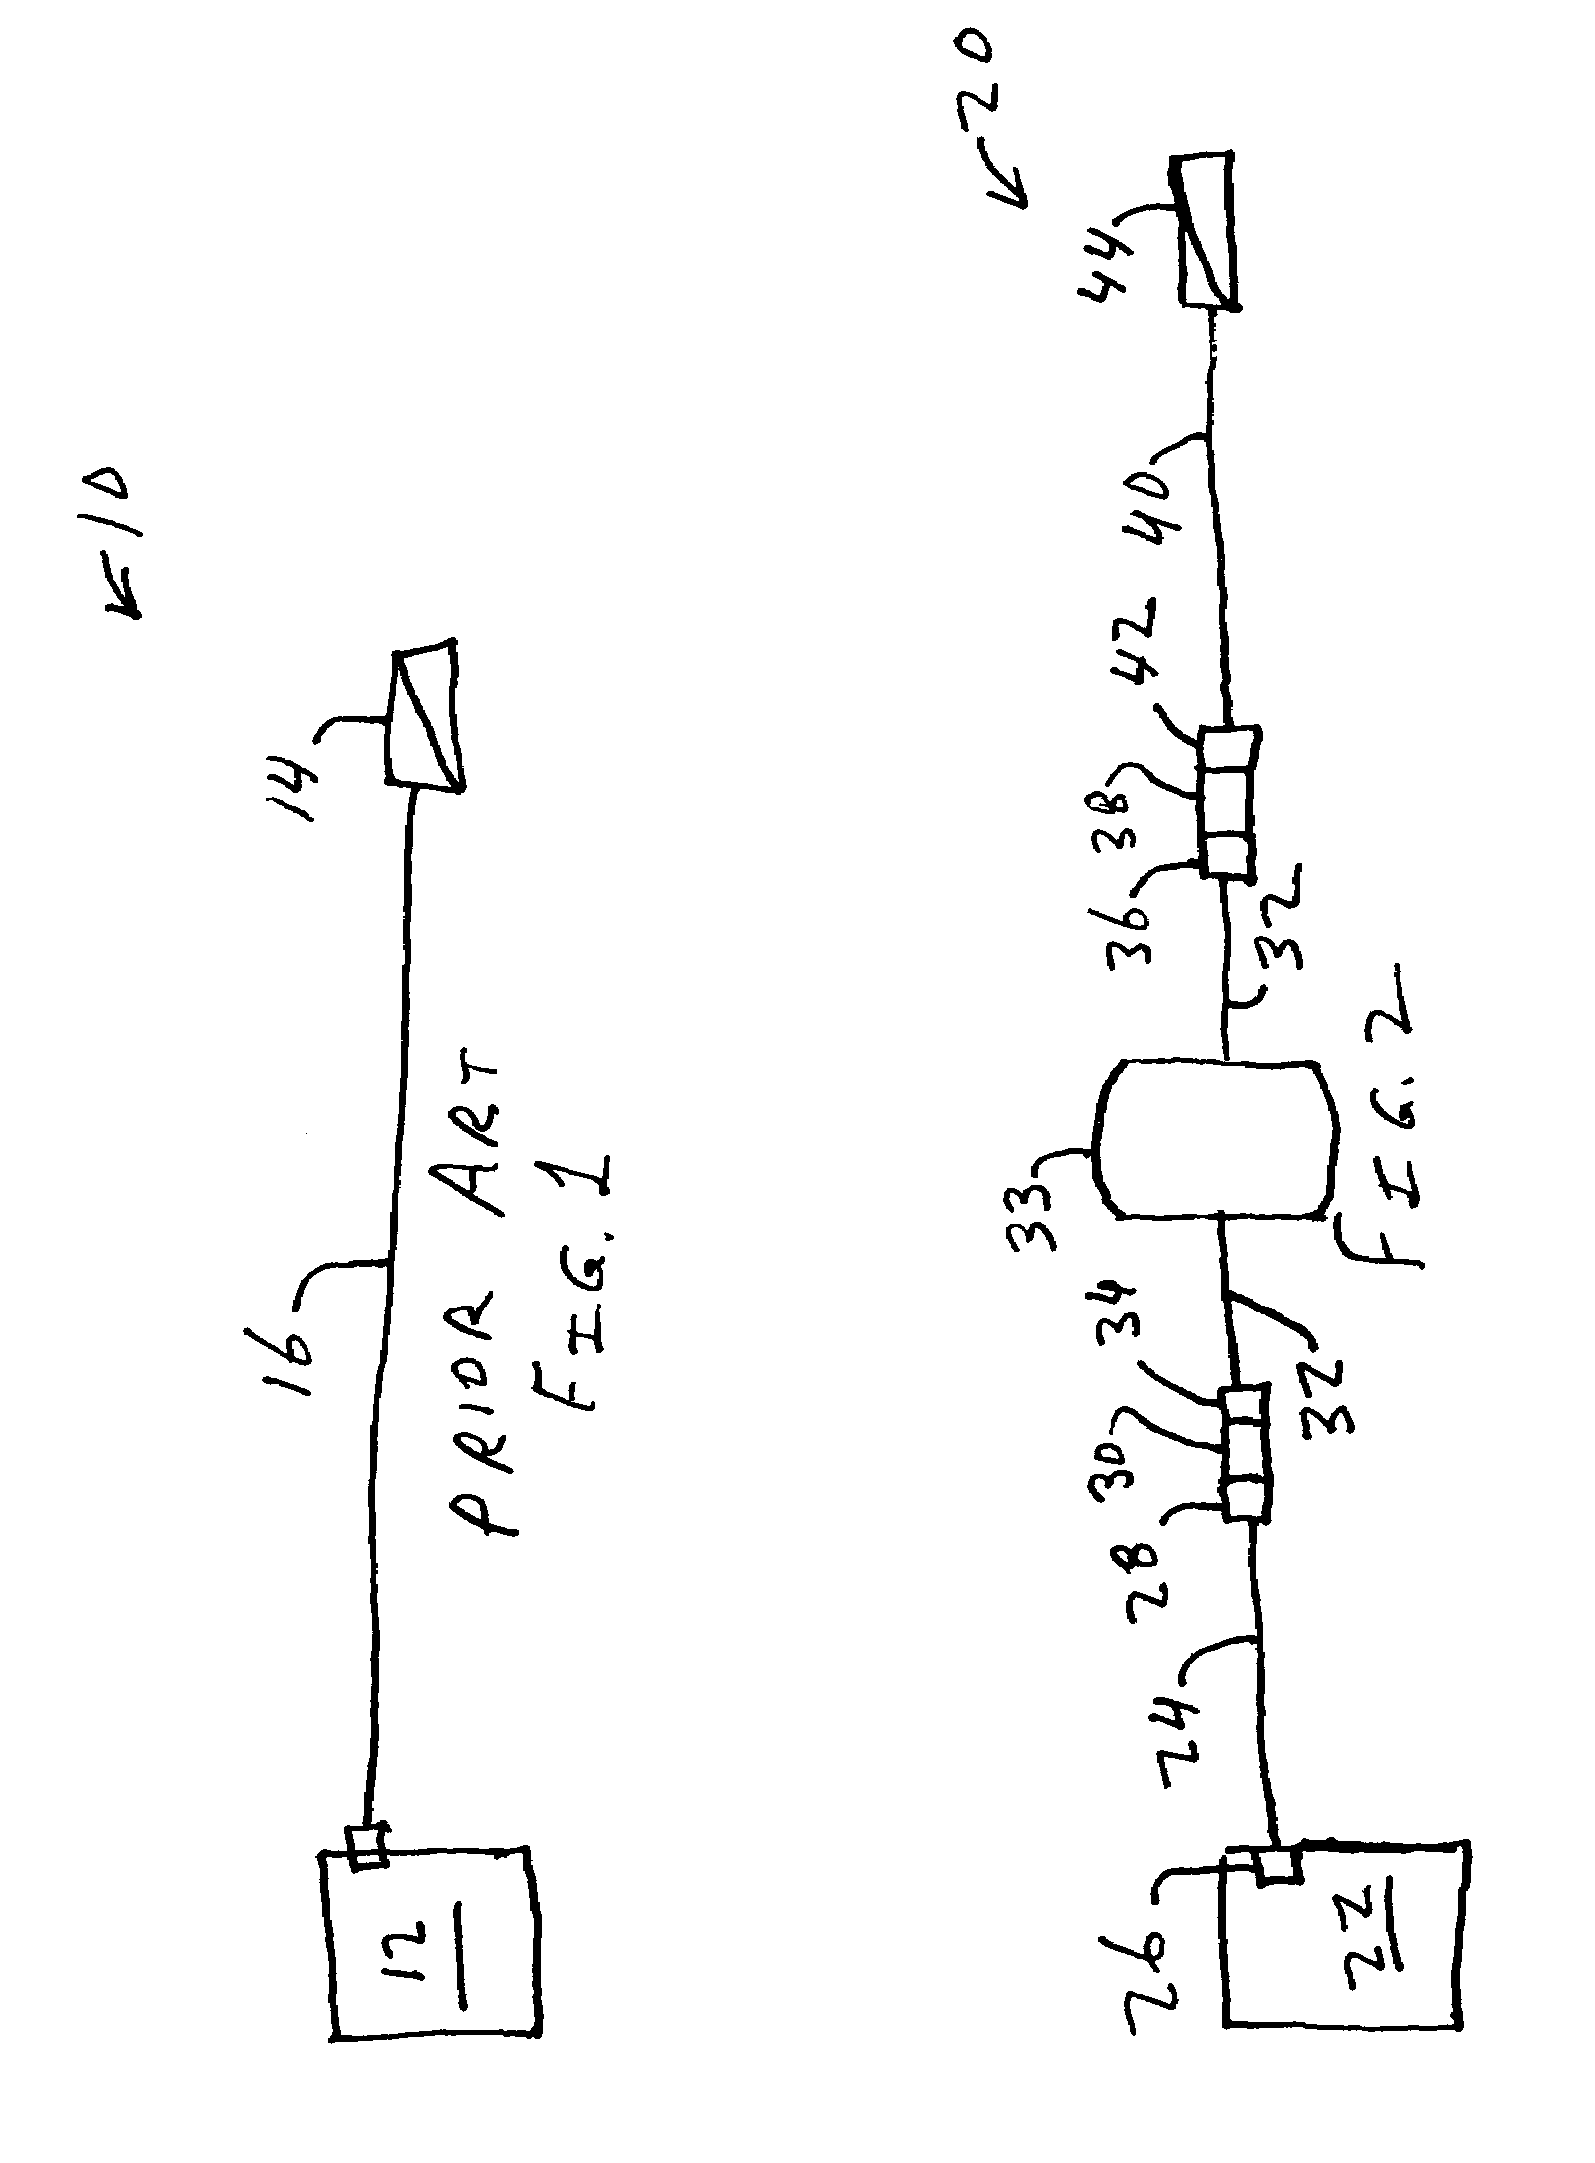 Apparatus for maintaining oximeter cables in orderly condition